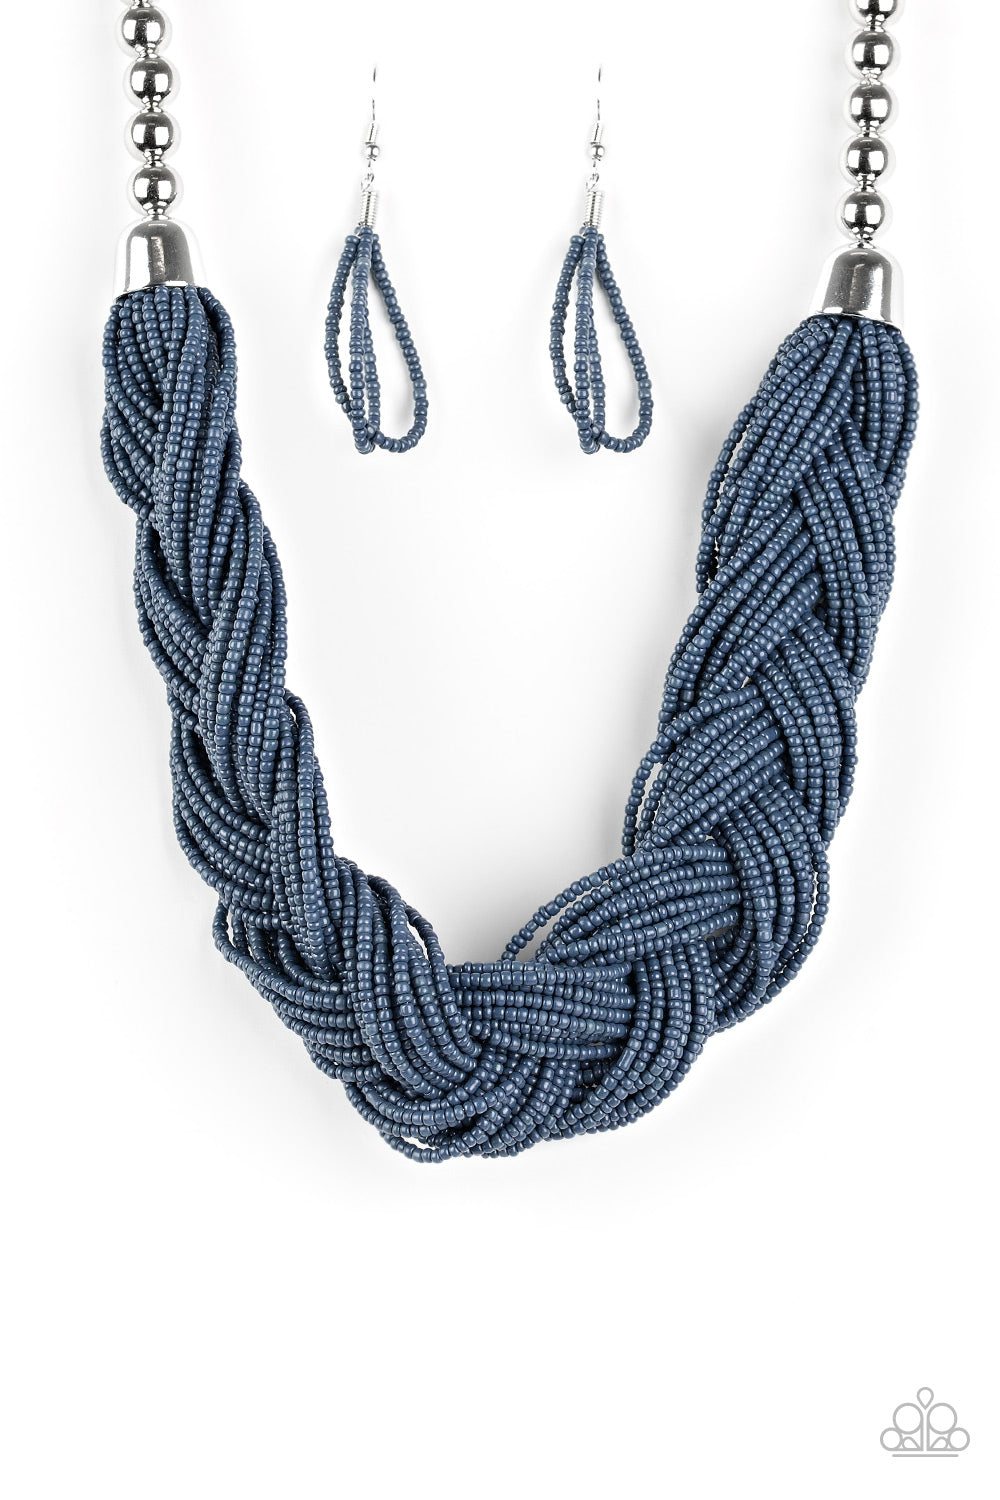 The Great Outback Blue-Necklace